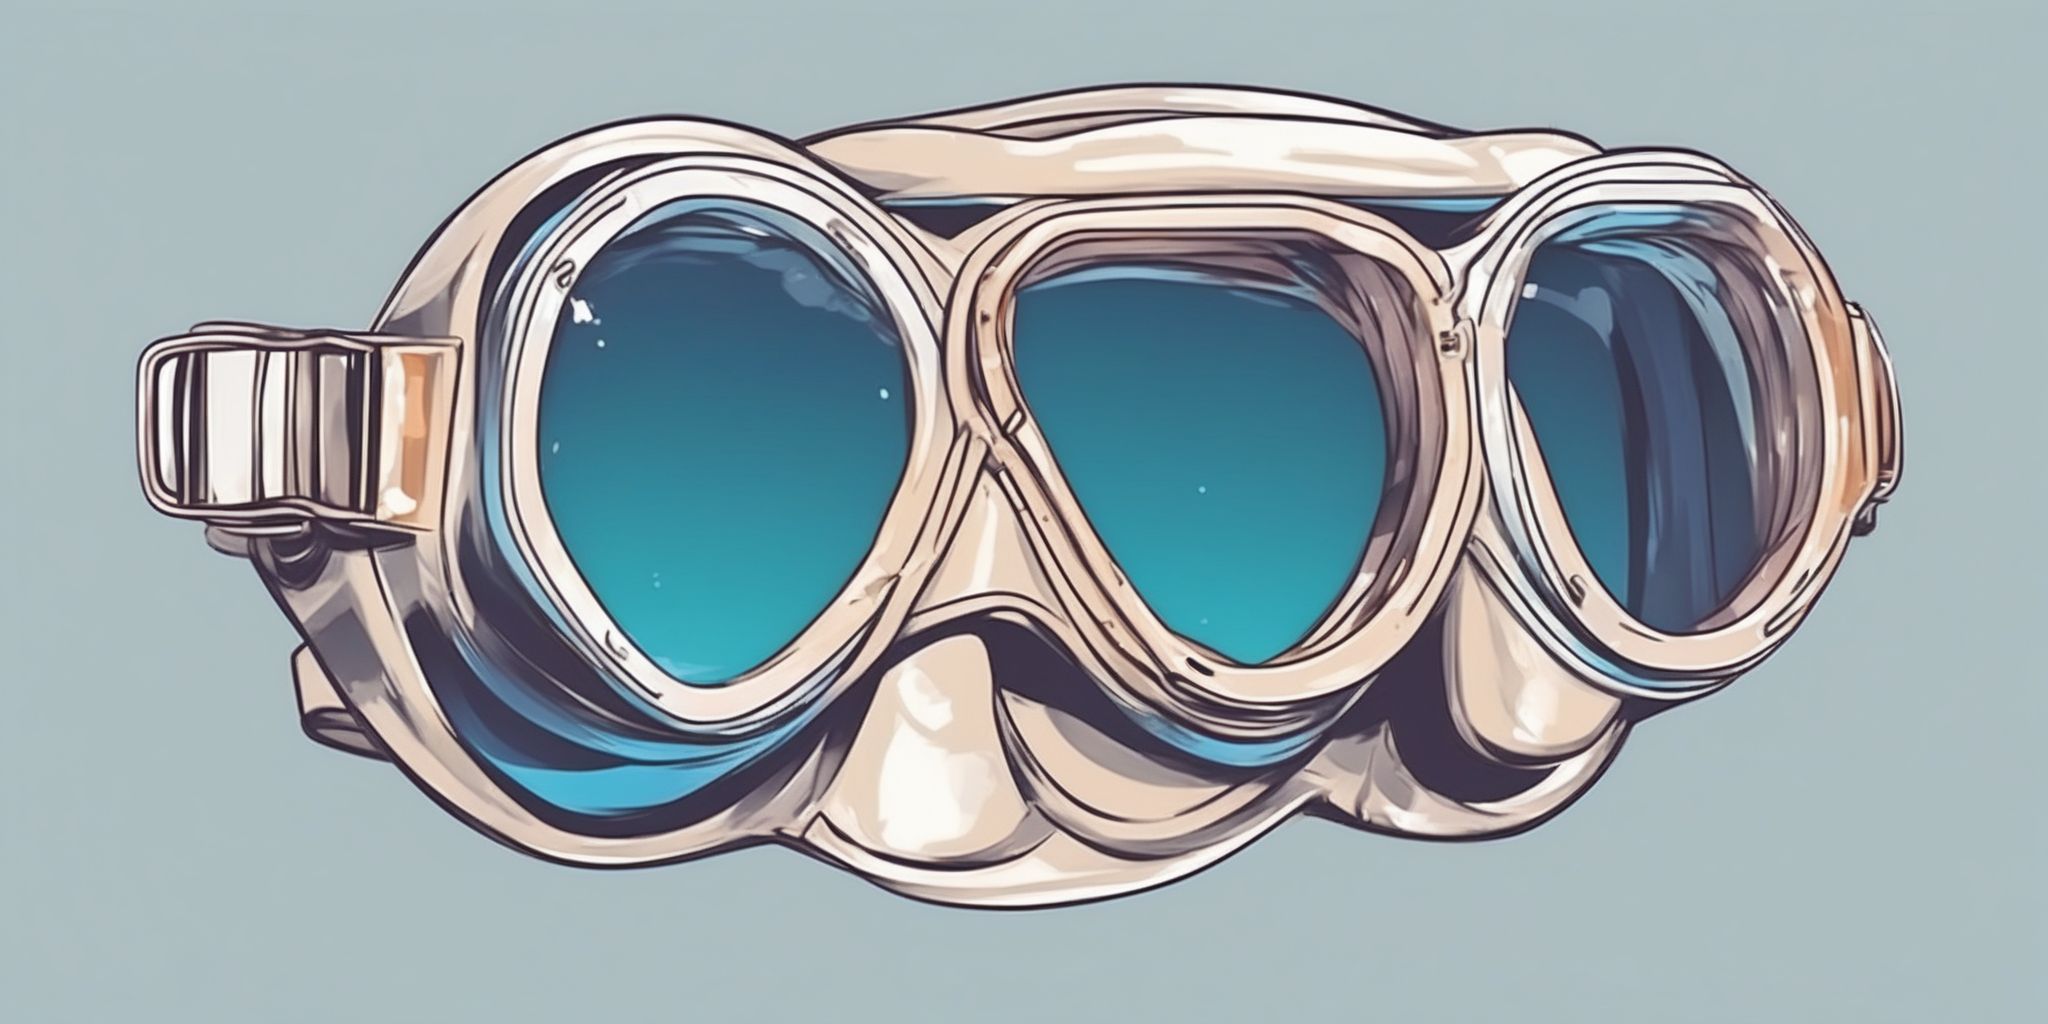 Diving goggles in illustration style with gradients and white background